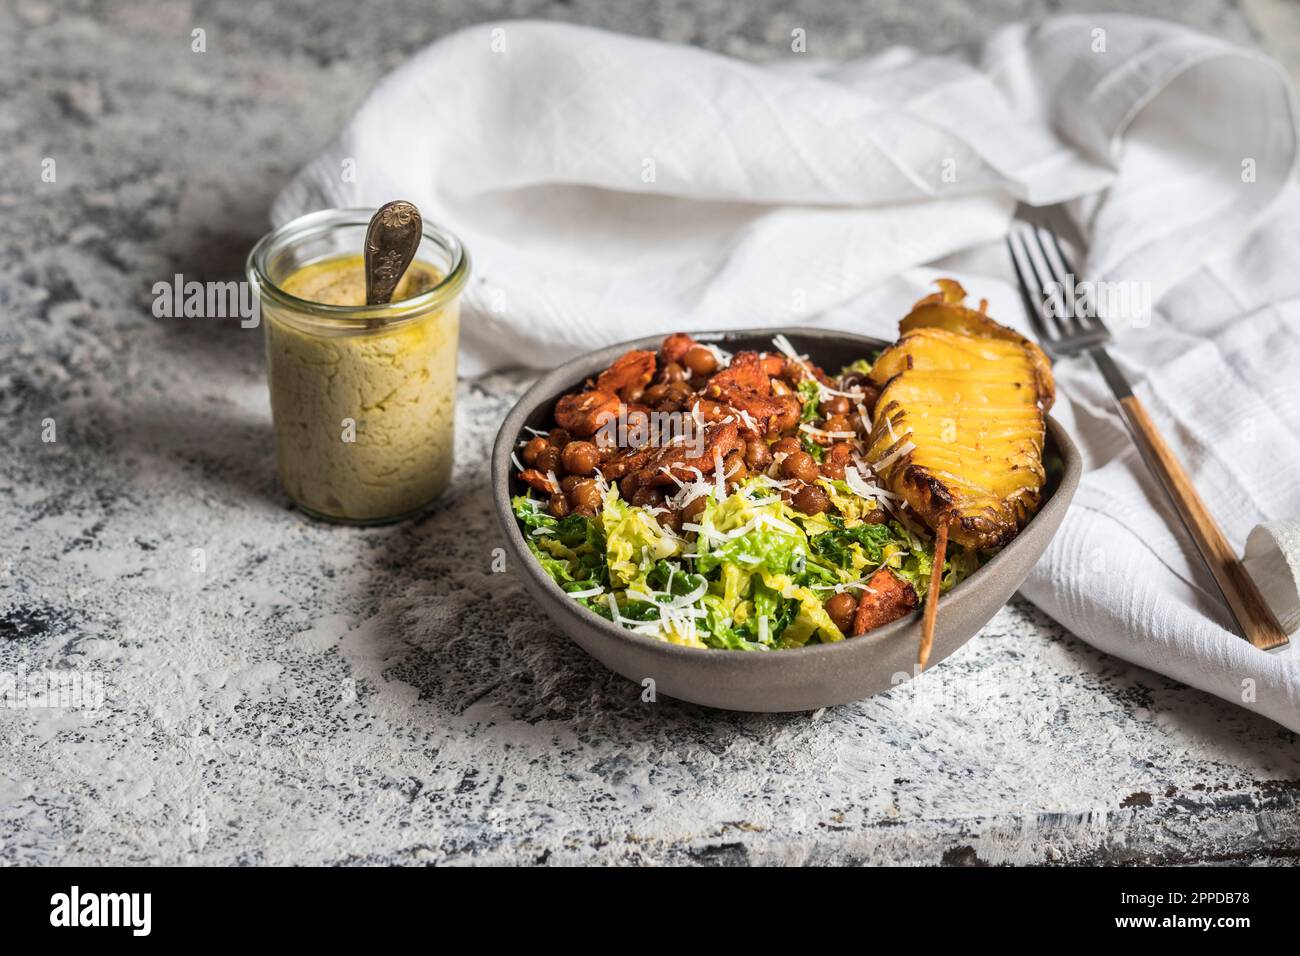 Bowl of salad with roasted chickpeas, carrots and roasted potato on skewer Stock Photo